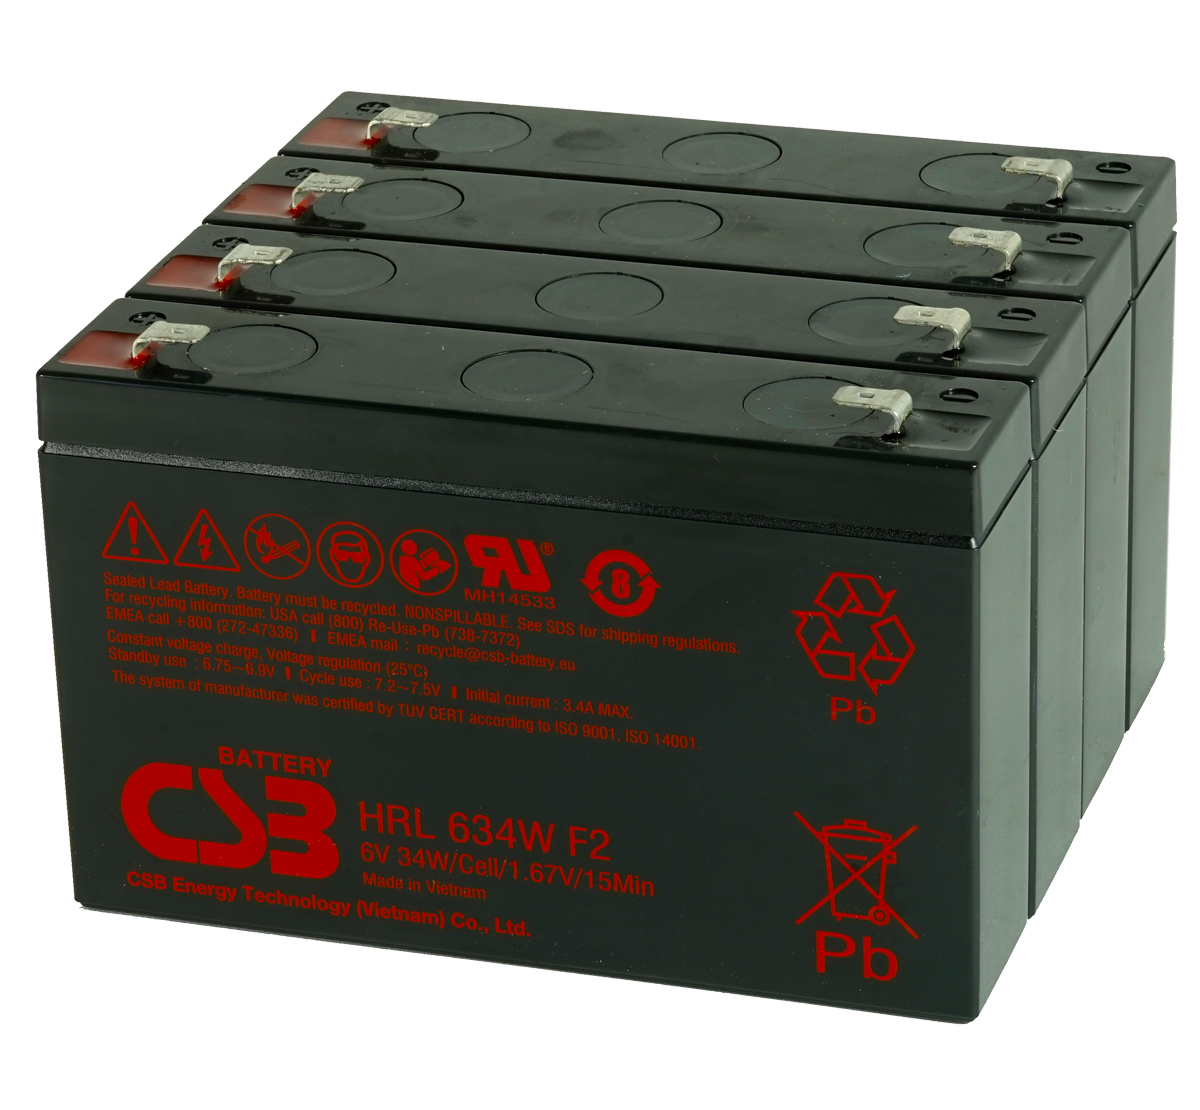 MDS1008 UPS Battery Kit for MGE AB1008